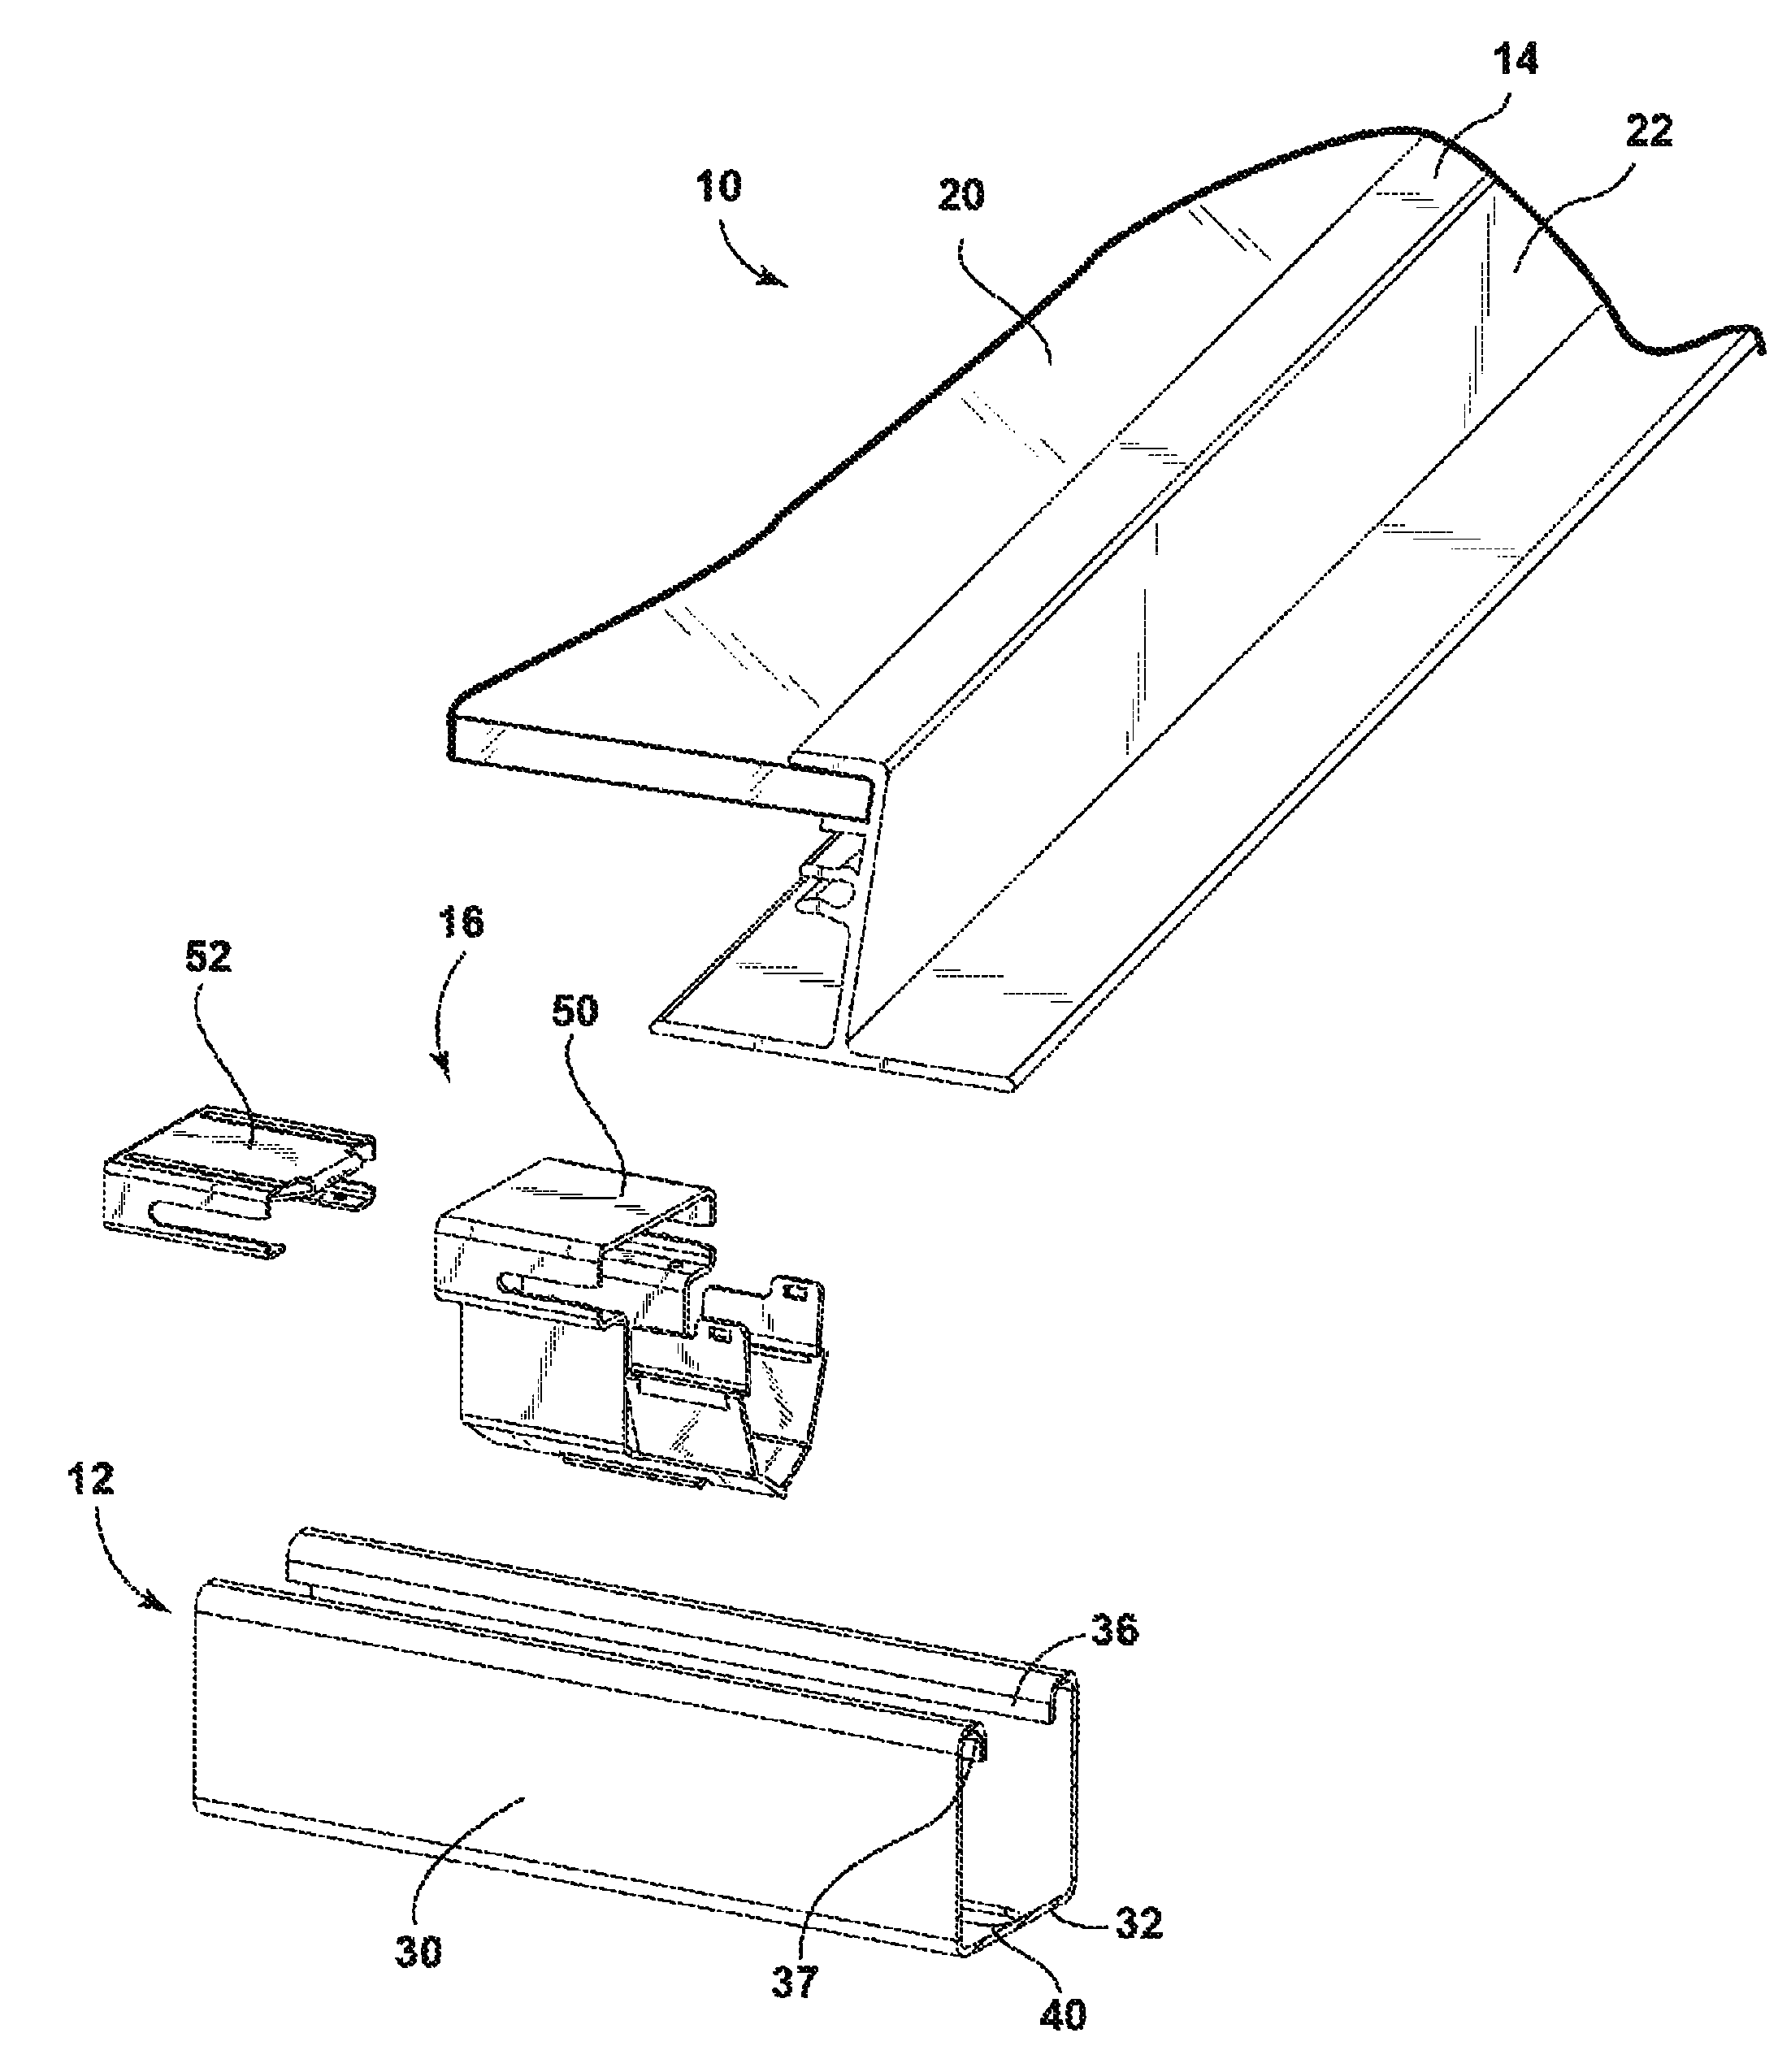 Universal clip apparatus for solar panel assembly